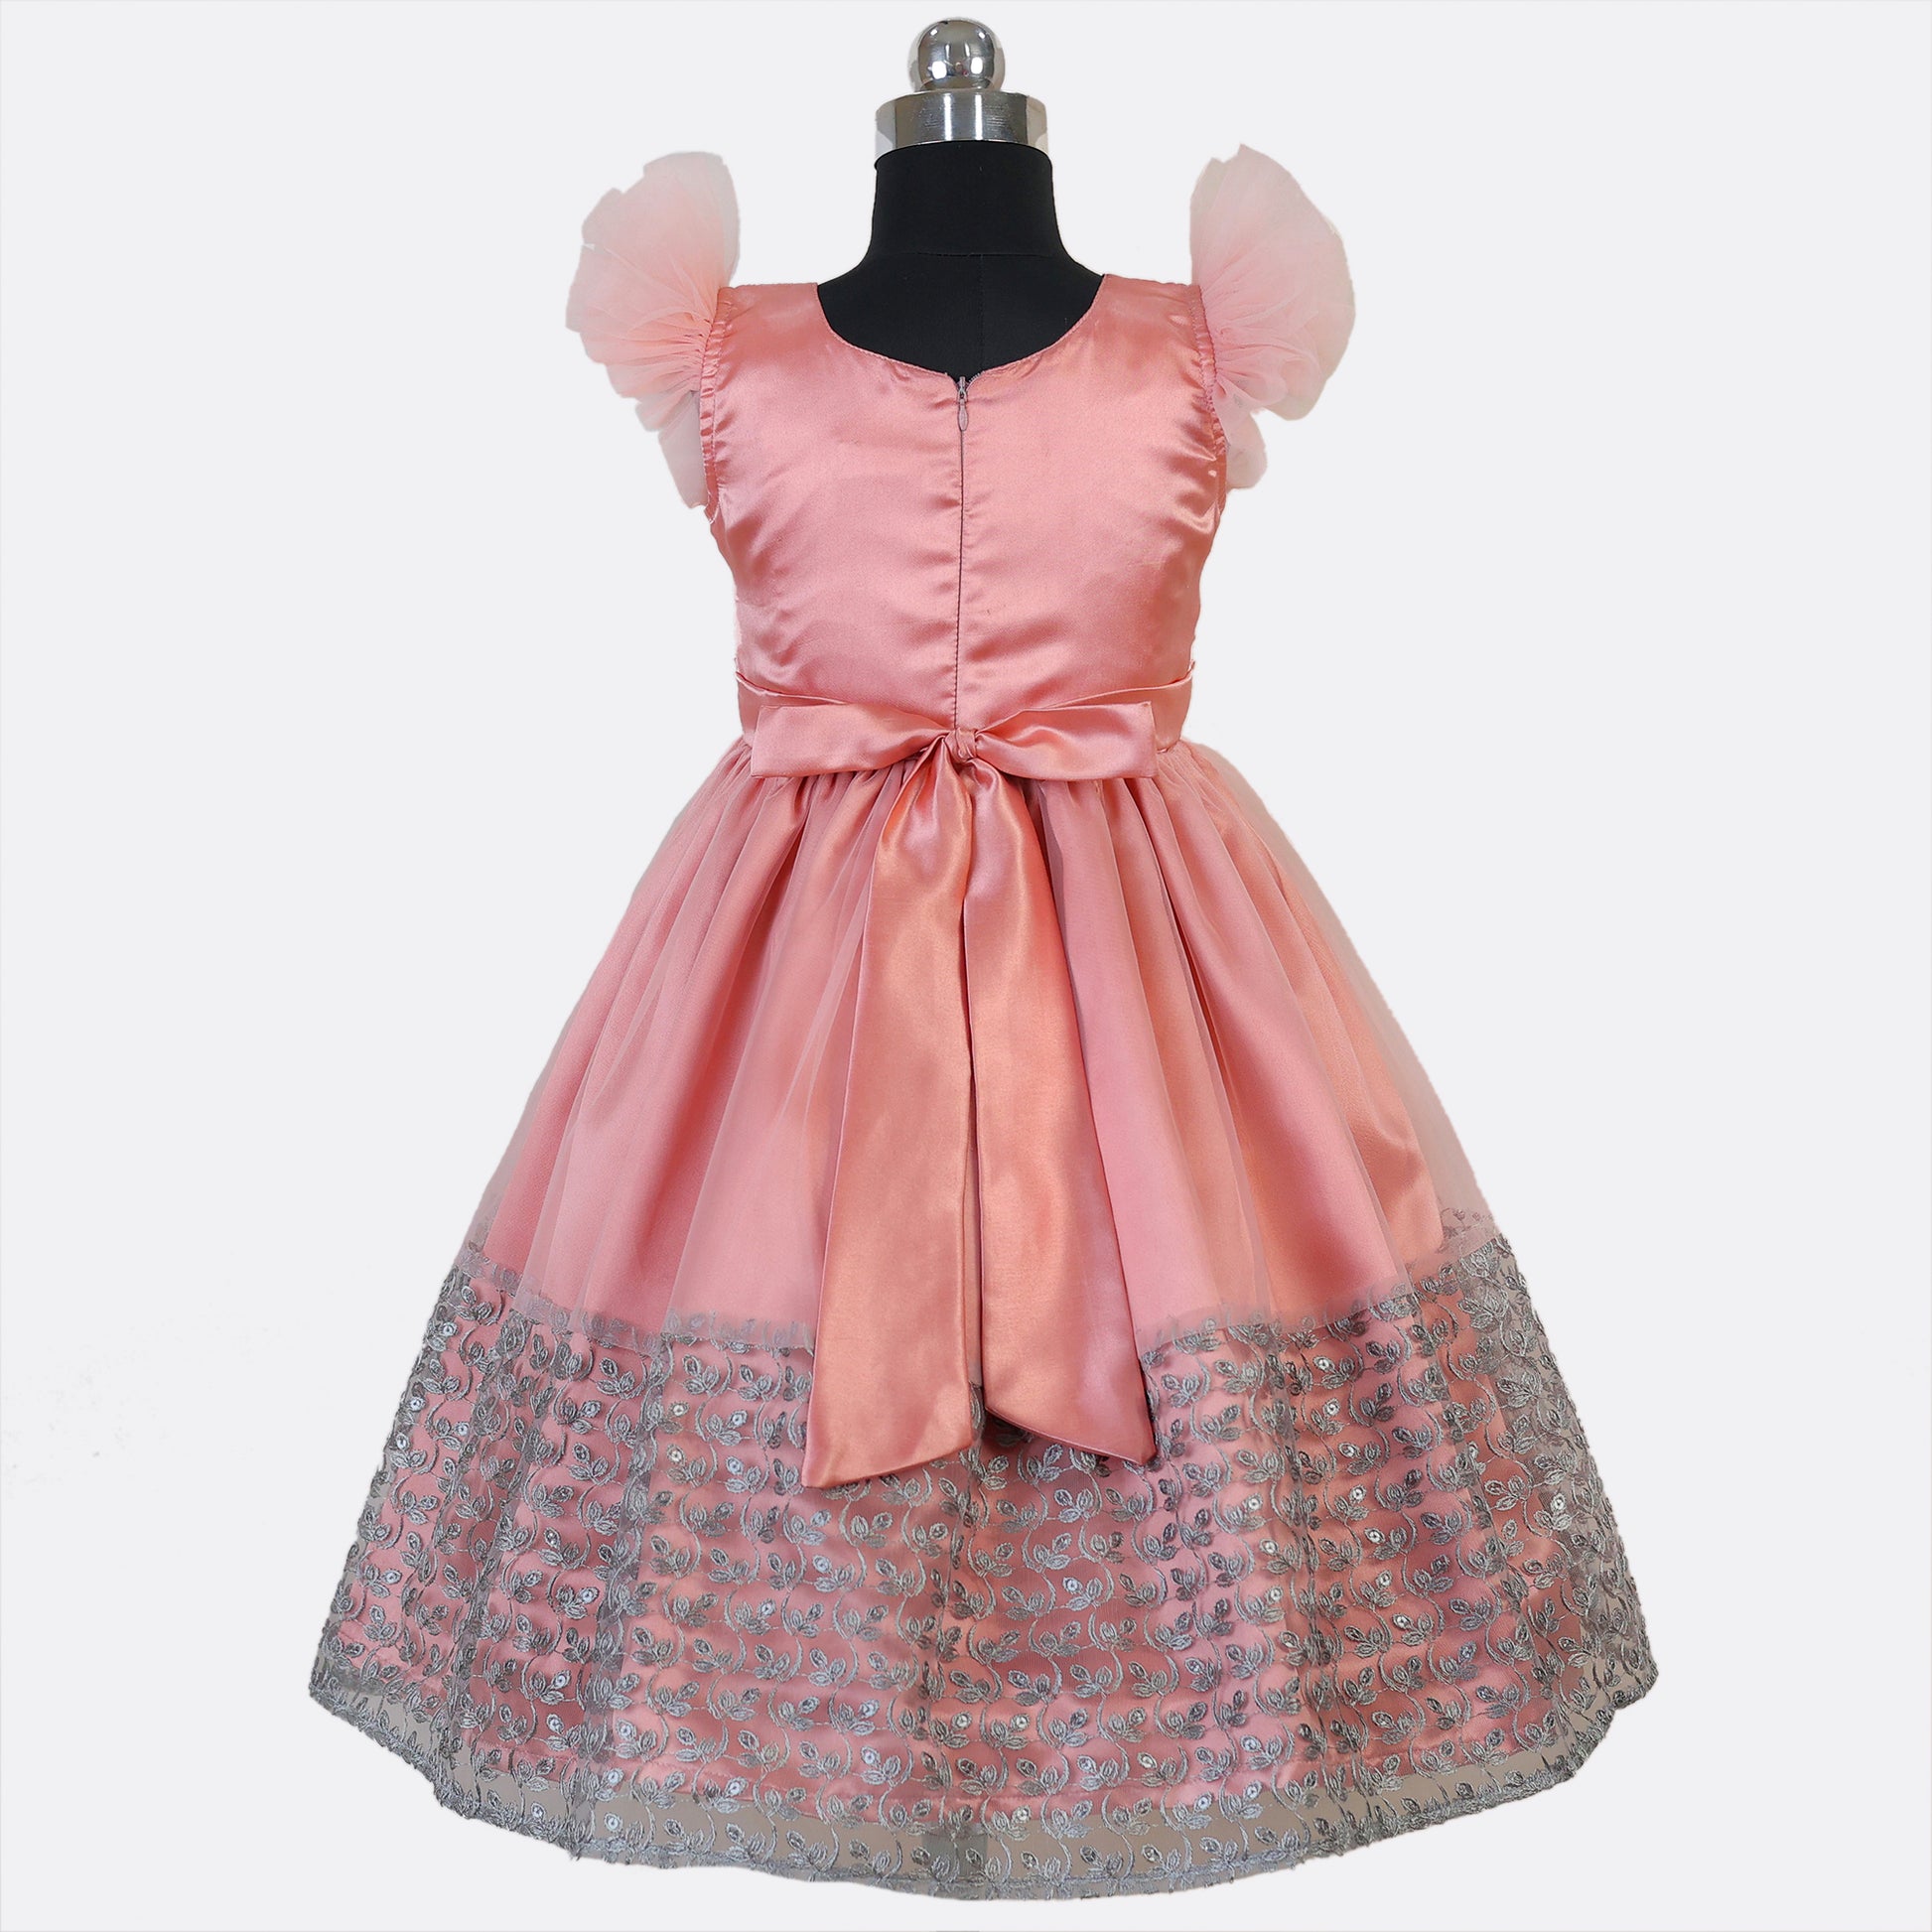 HEYKIDOO latest designer clothing kids girls stylish comfortable dress Knee length birthday Party wear frock fashionable 8 years unique beautiful pink floral birthday gown buy online shopping India